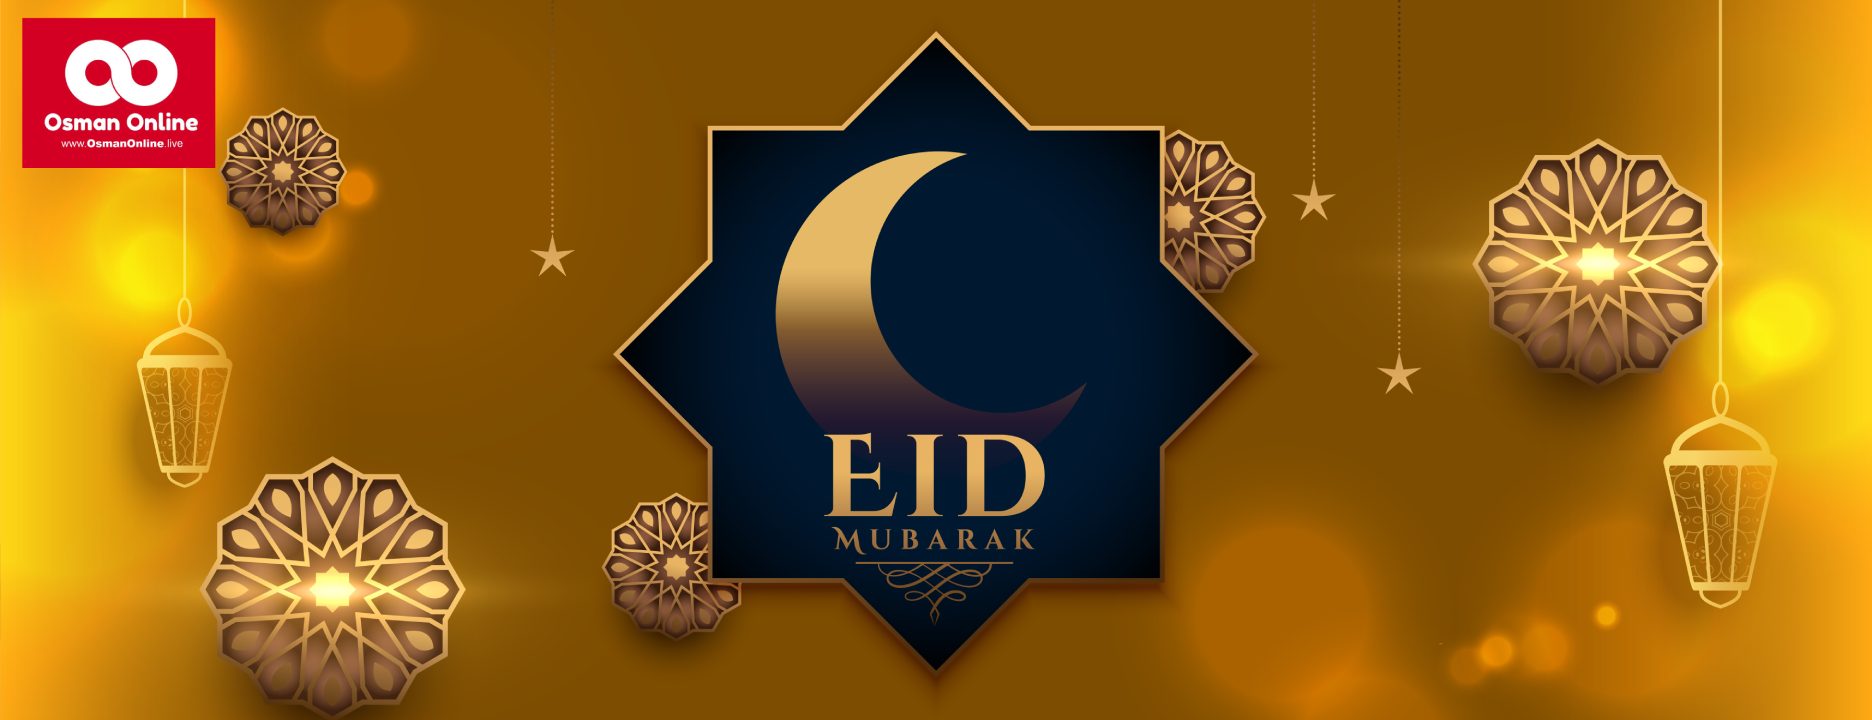 Eid Celebration on OsmanOnline.live: A Shared Celebration of Faith, Unity, and Stories That Bring Us Together.